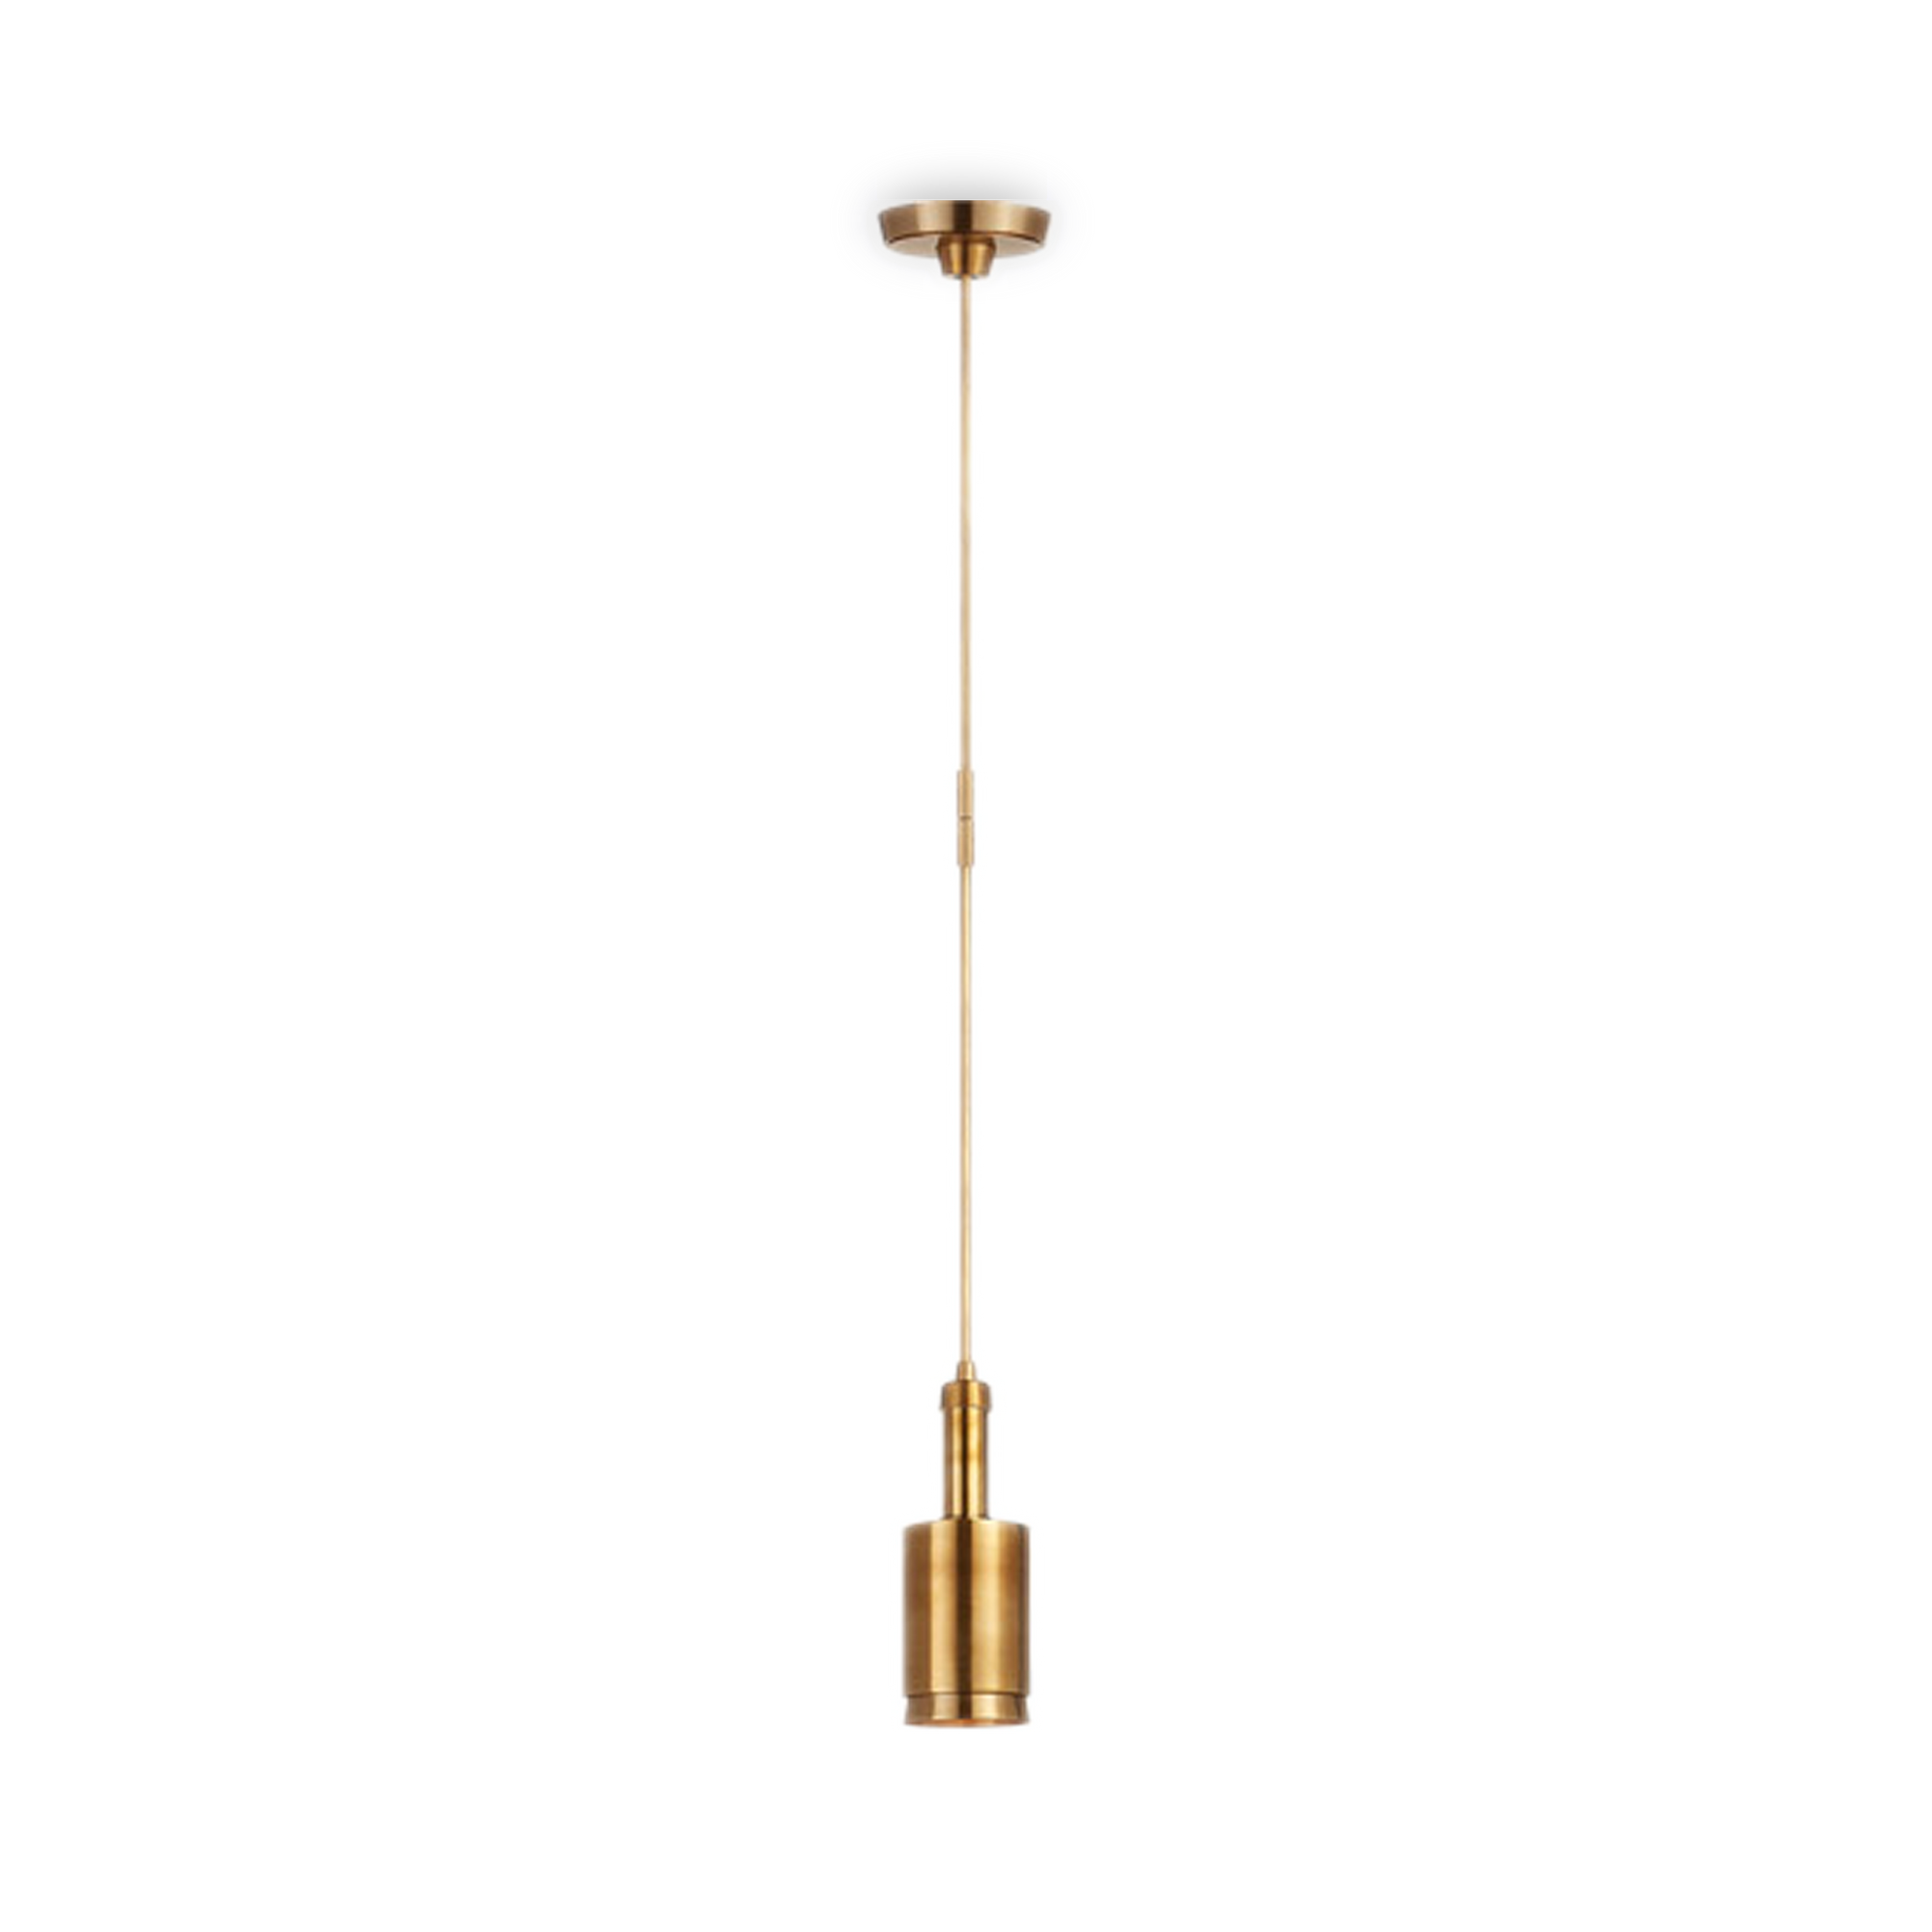 The Anders Small Cylindrical Pendant bridges traditional and modern styles.